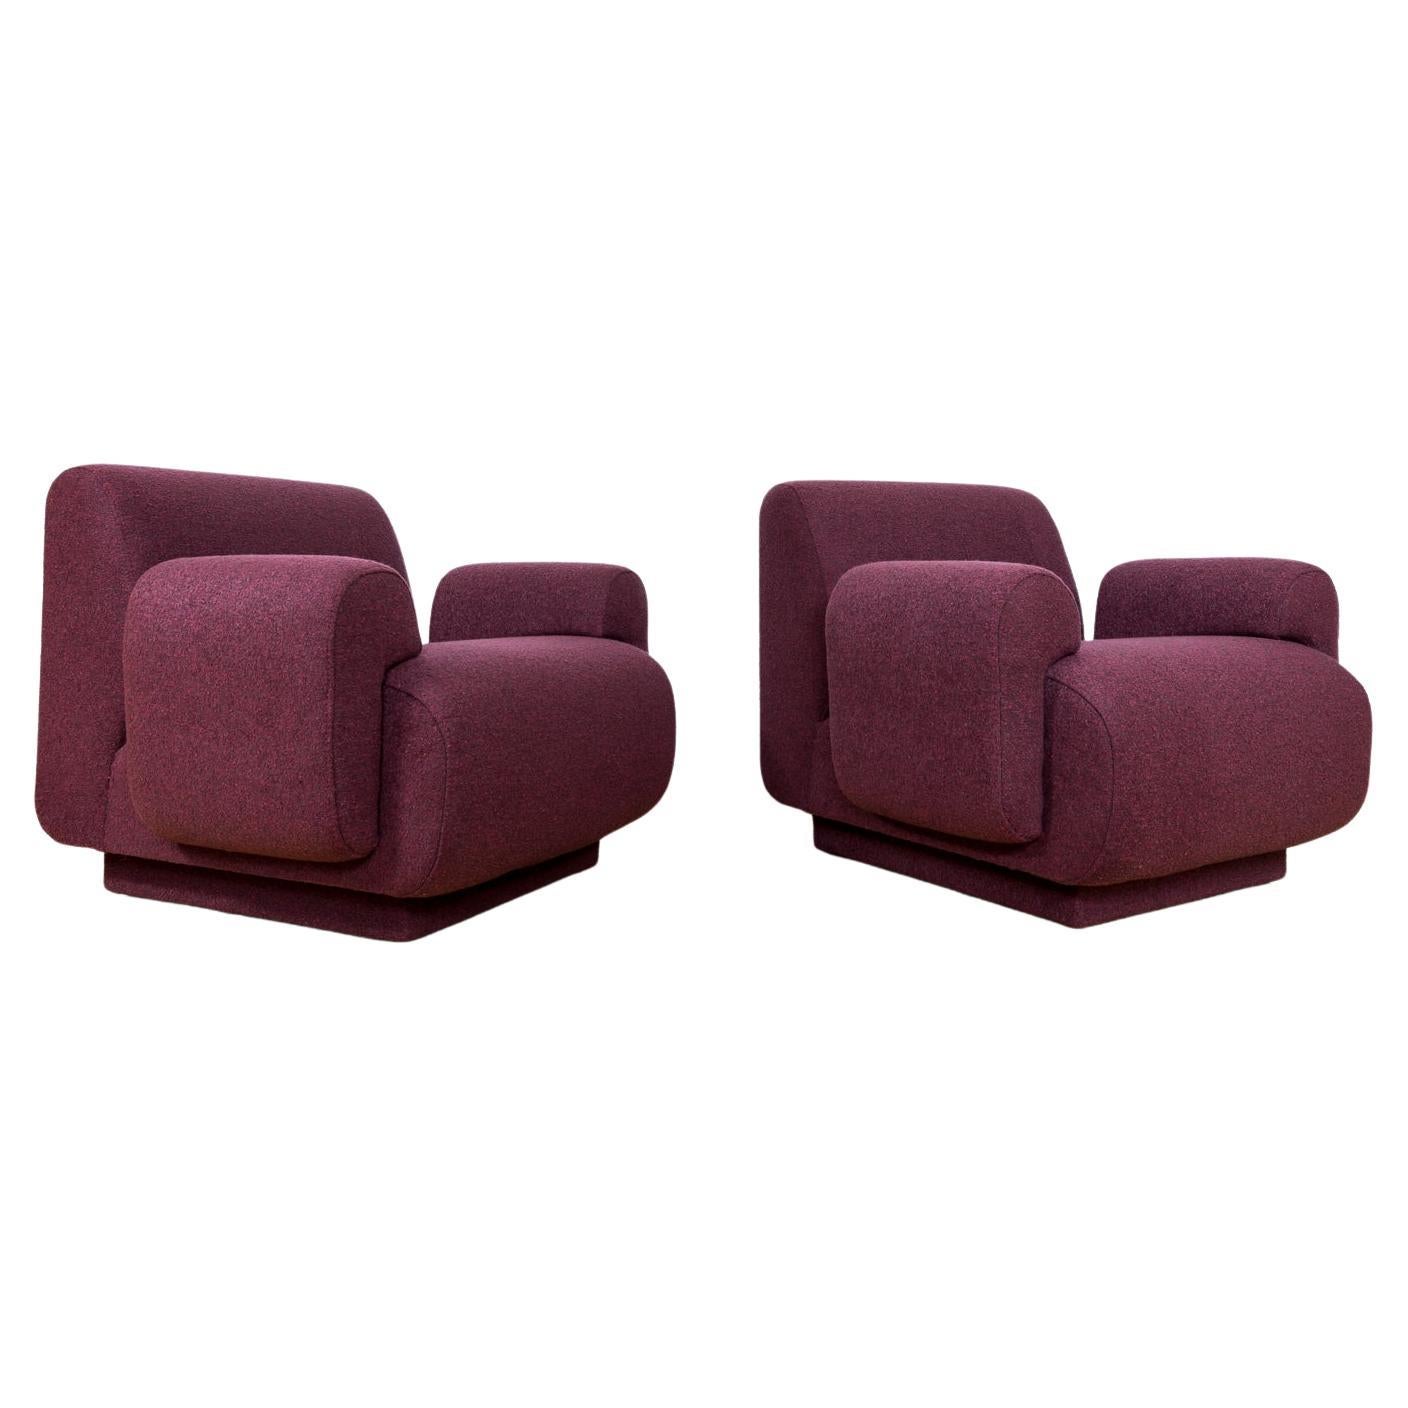 Pair Of Purple Modular Lounge Chairs, 1970, Germany For Sale